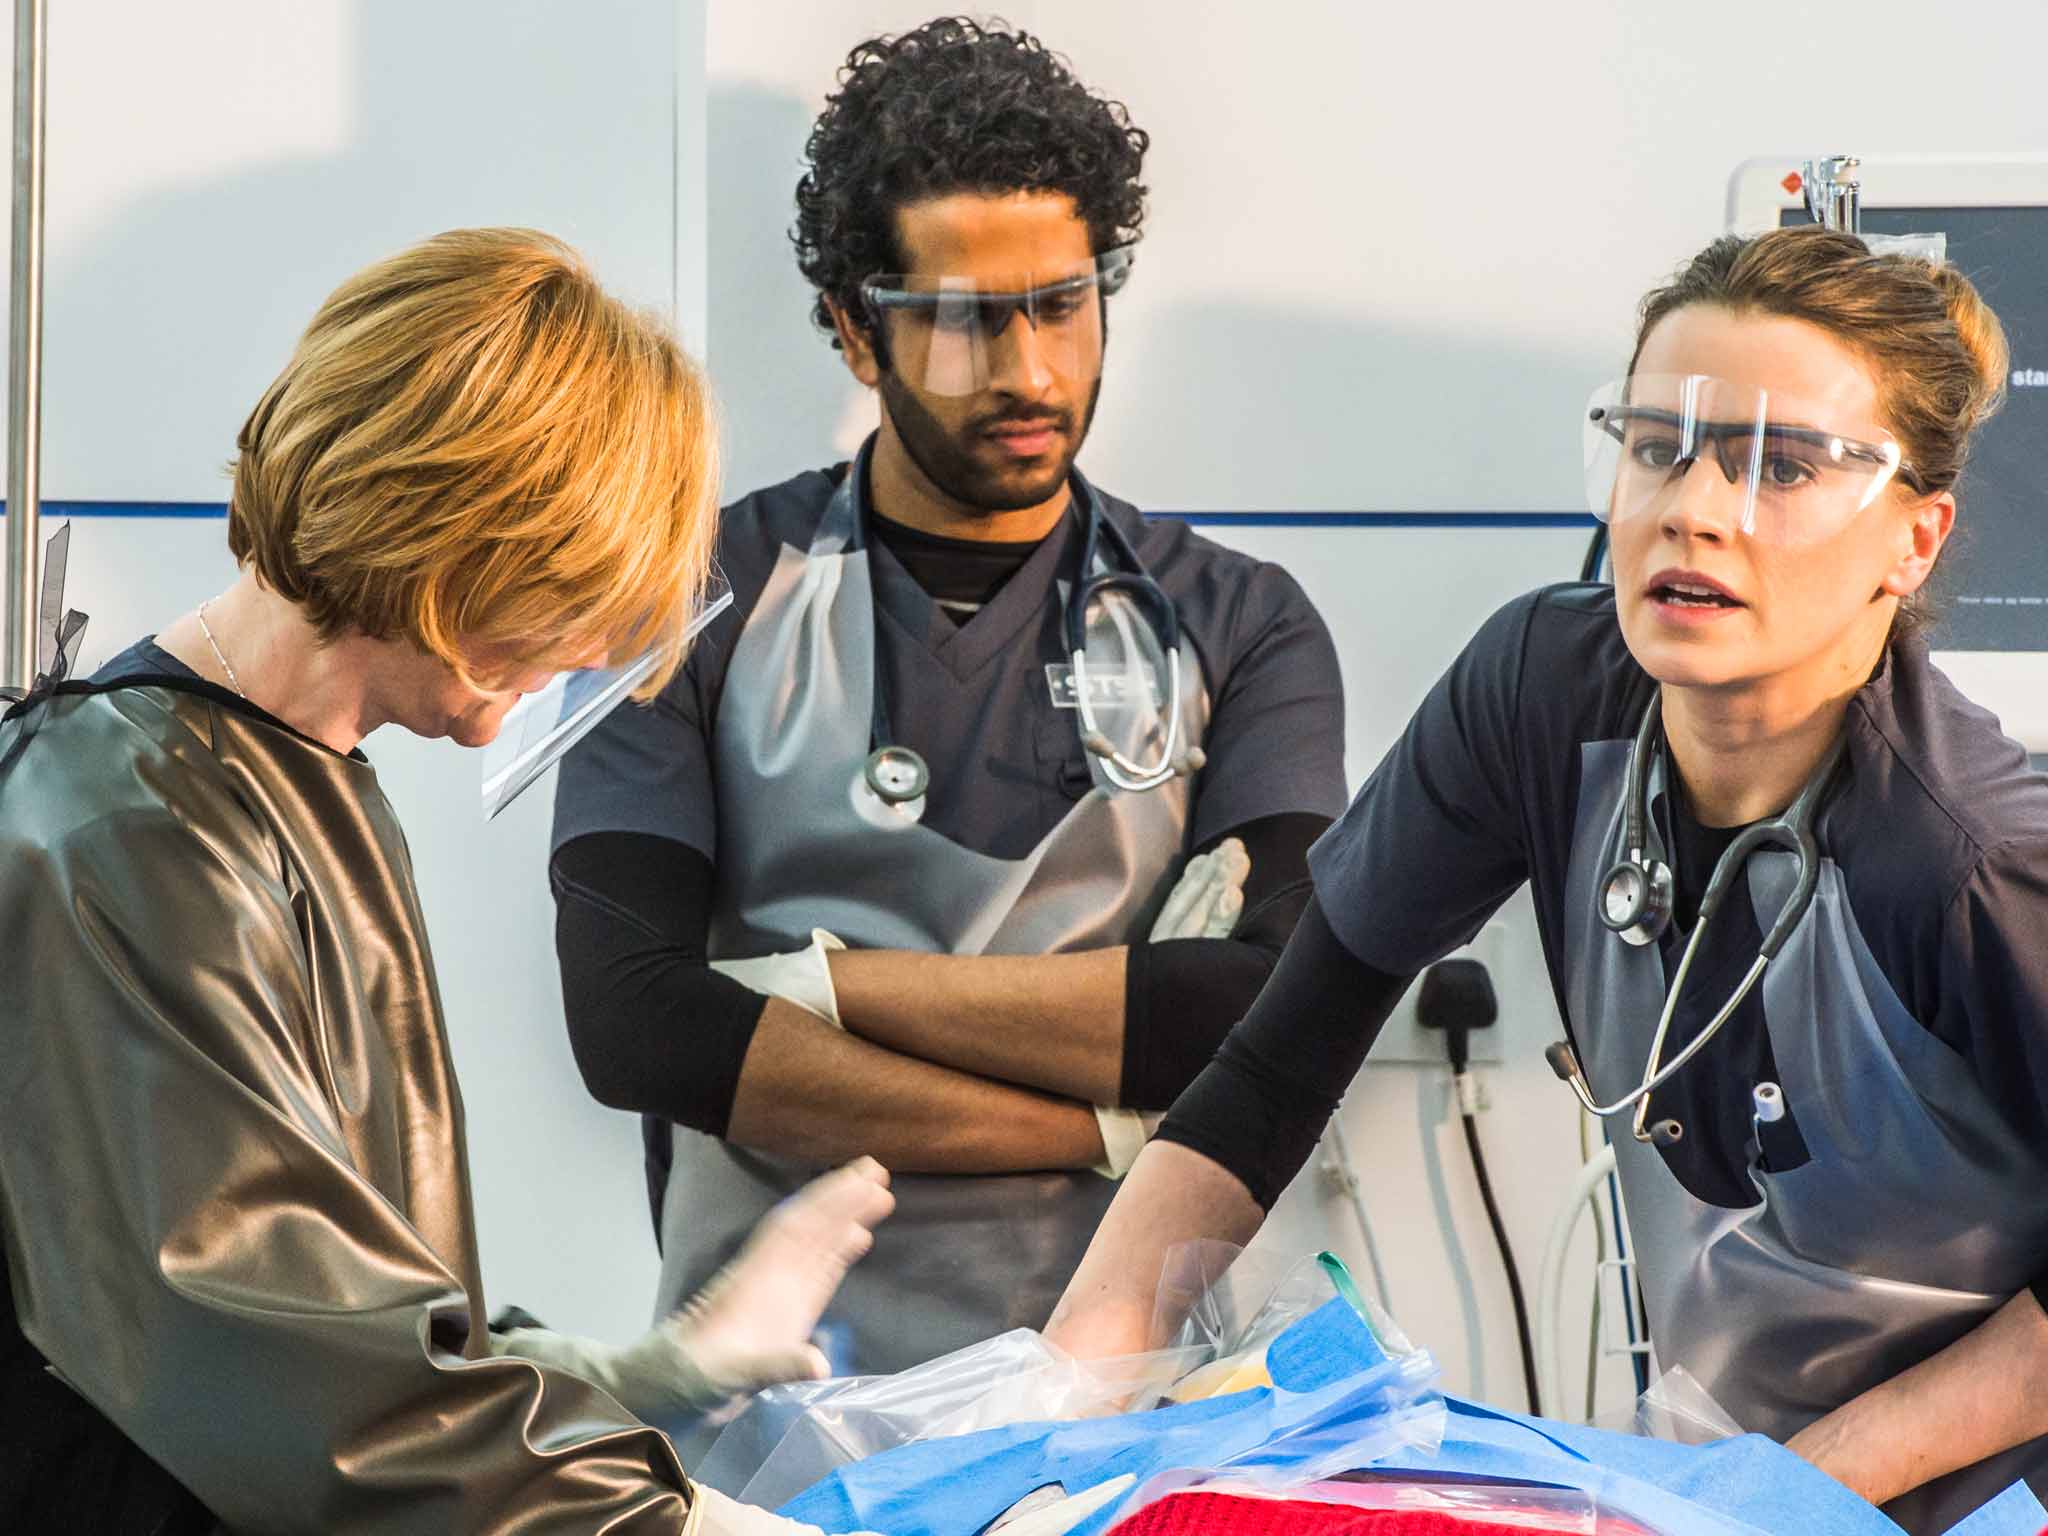 Smooth operators: Claire Skinner, Prasanna Puwanarajah and Catherine Walker in 'Critical'